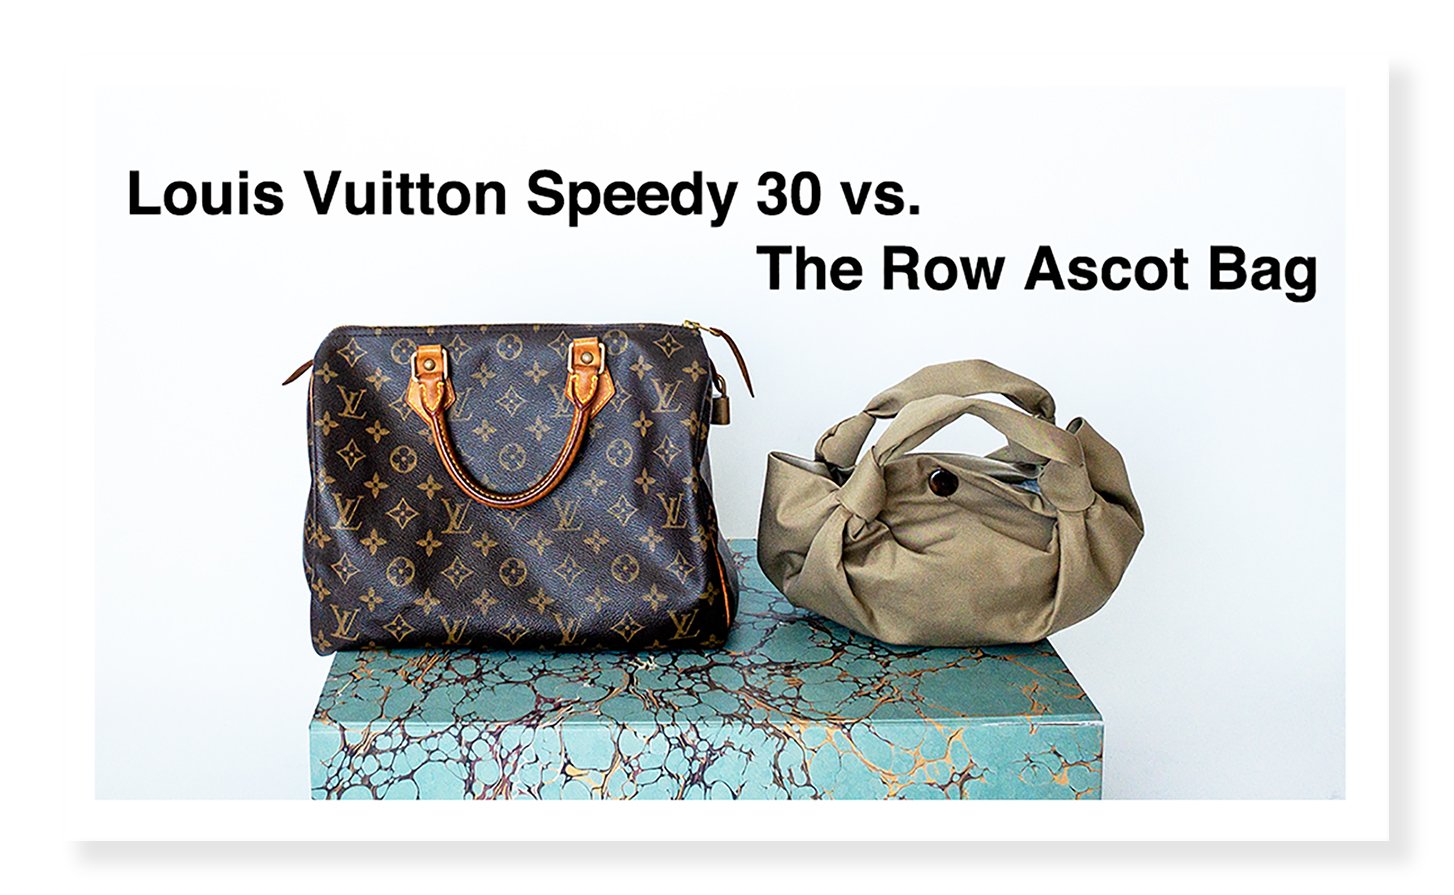 here's ashley olsen wearing the louis vuitton speedy! we have this